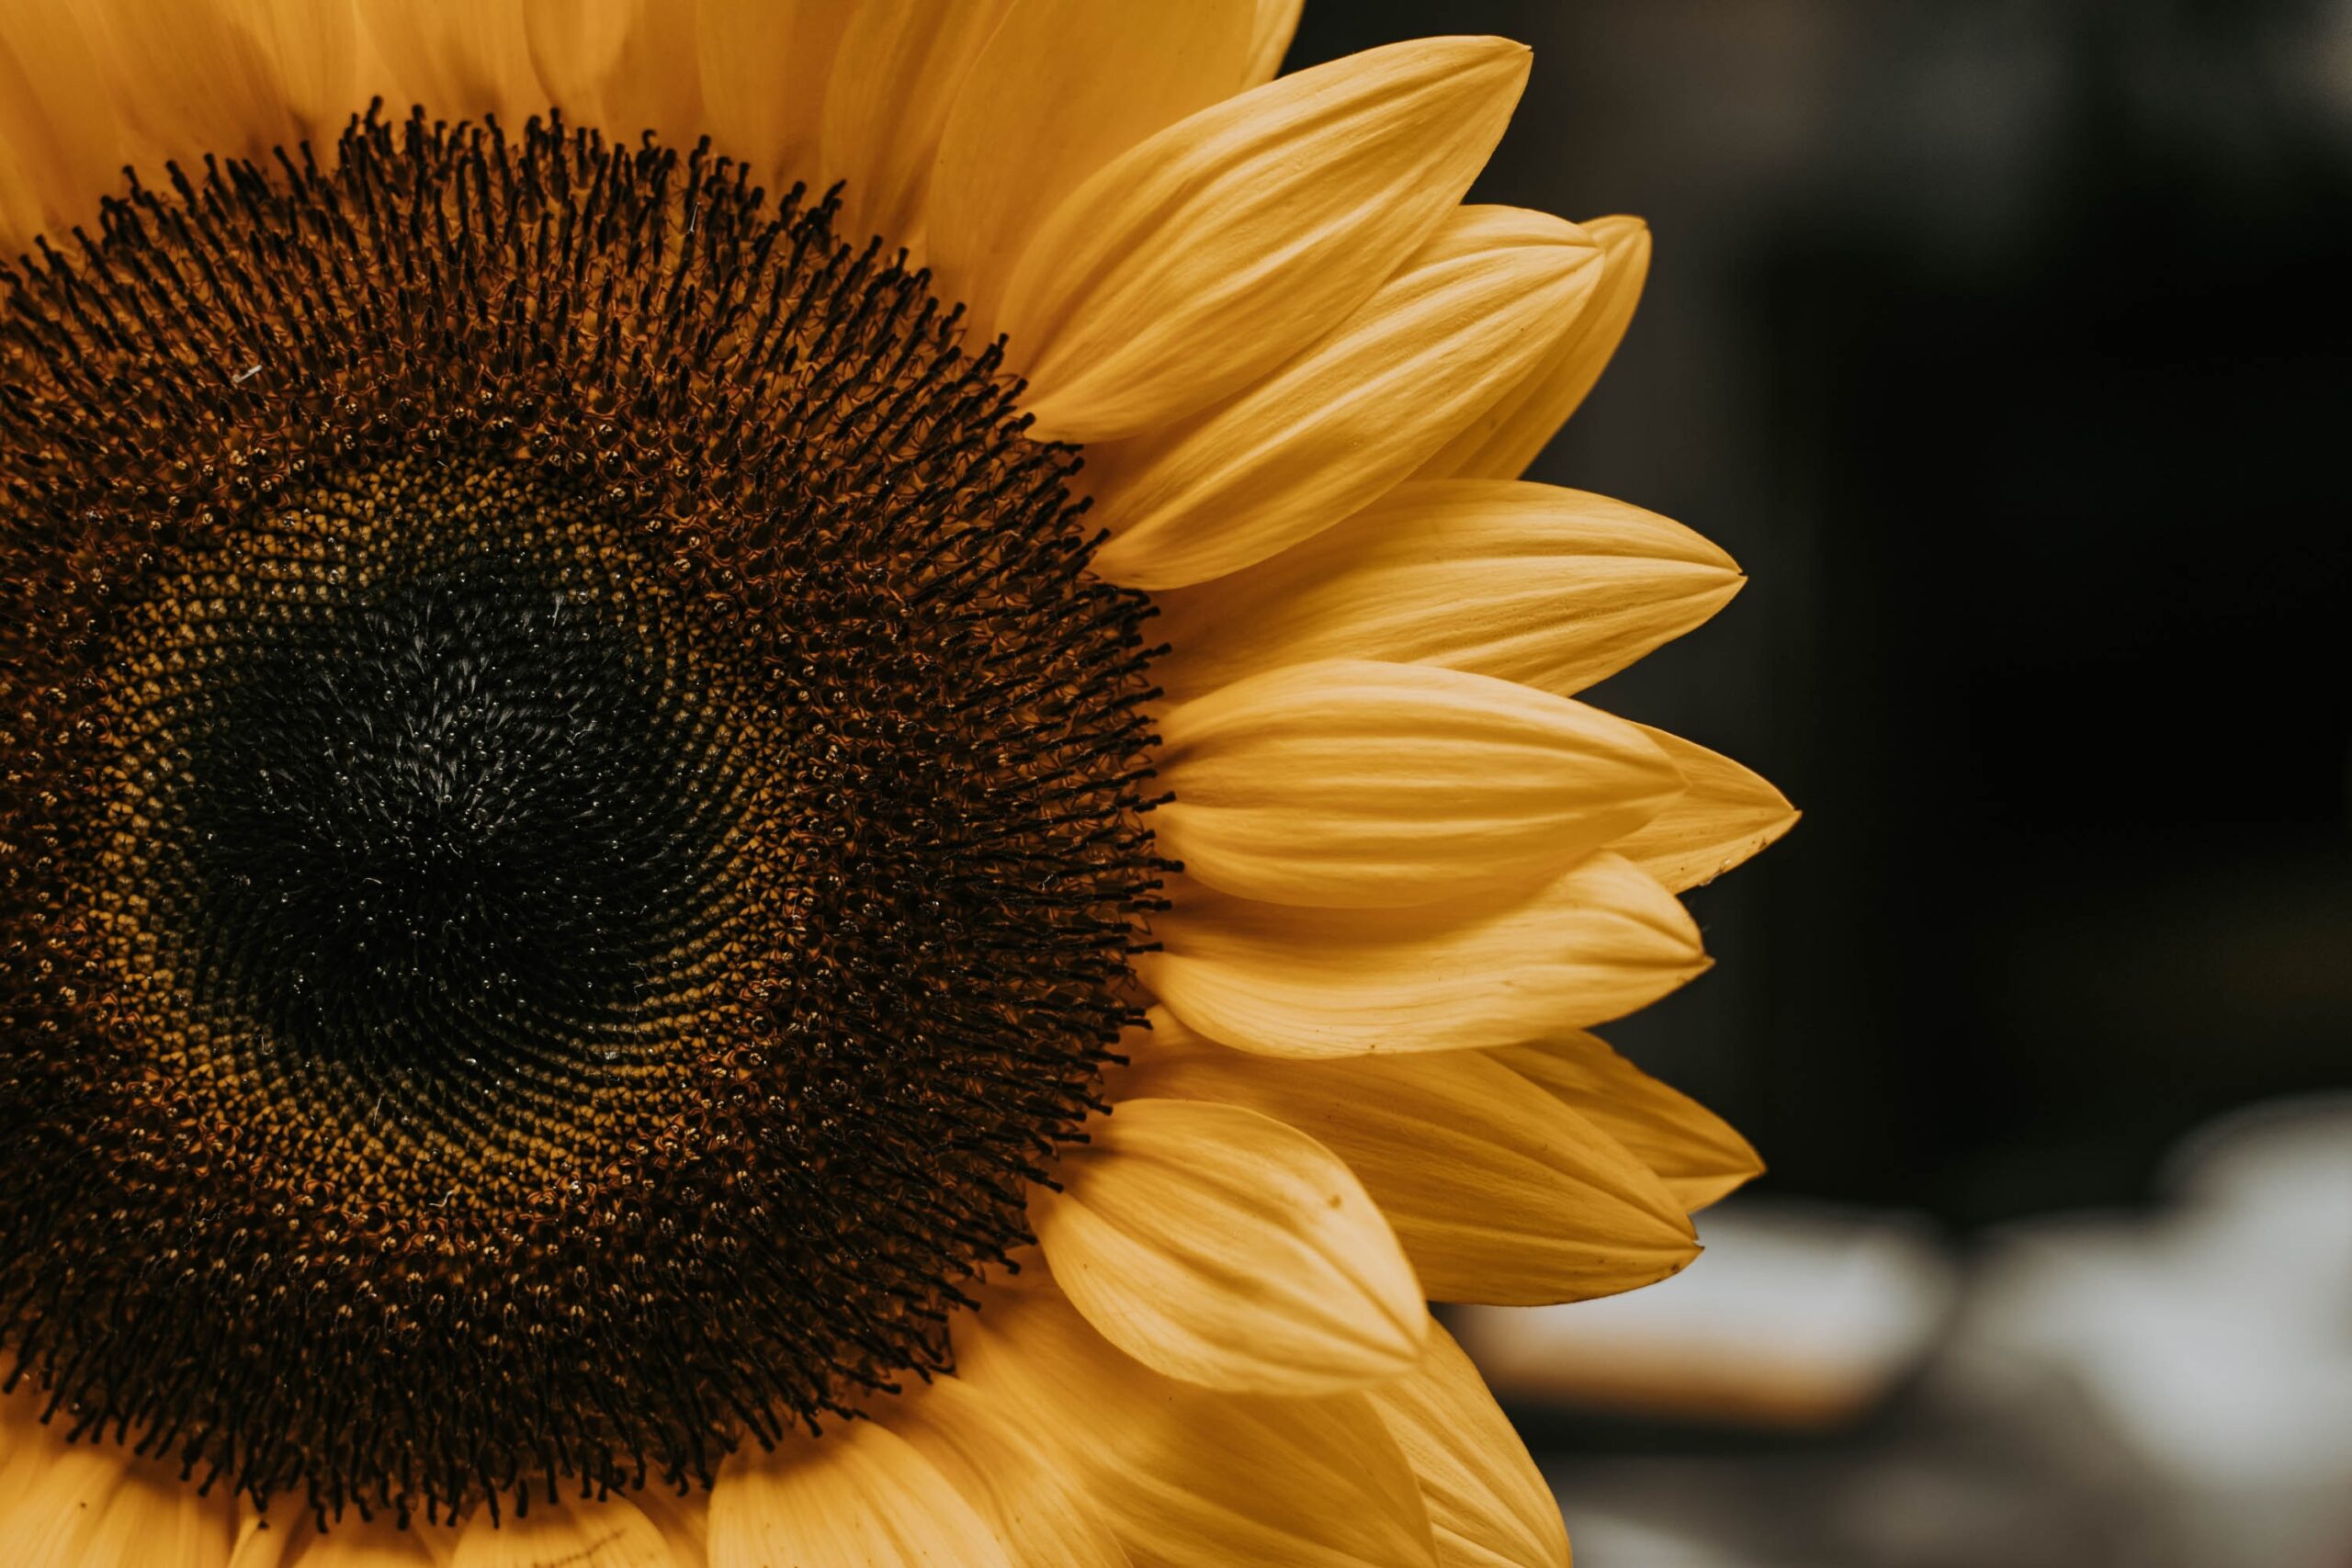 A sunflower in bloom, with a focus on its seeds, showing how core values and purpose help people navigate uncertainty.